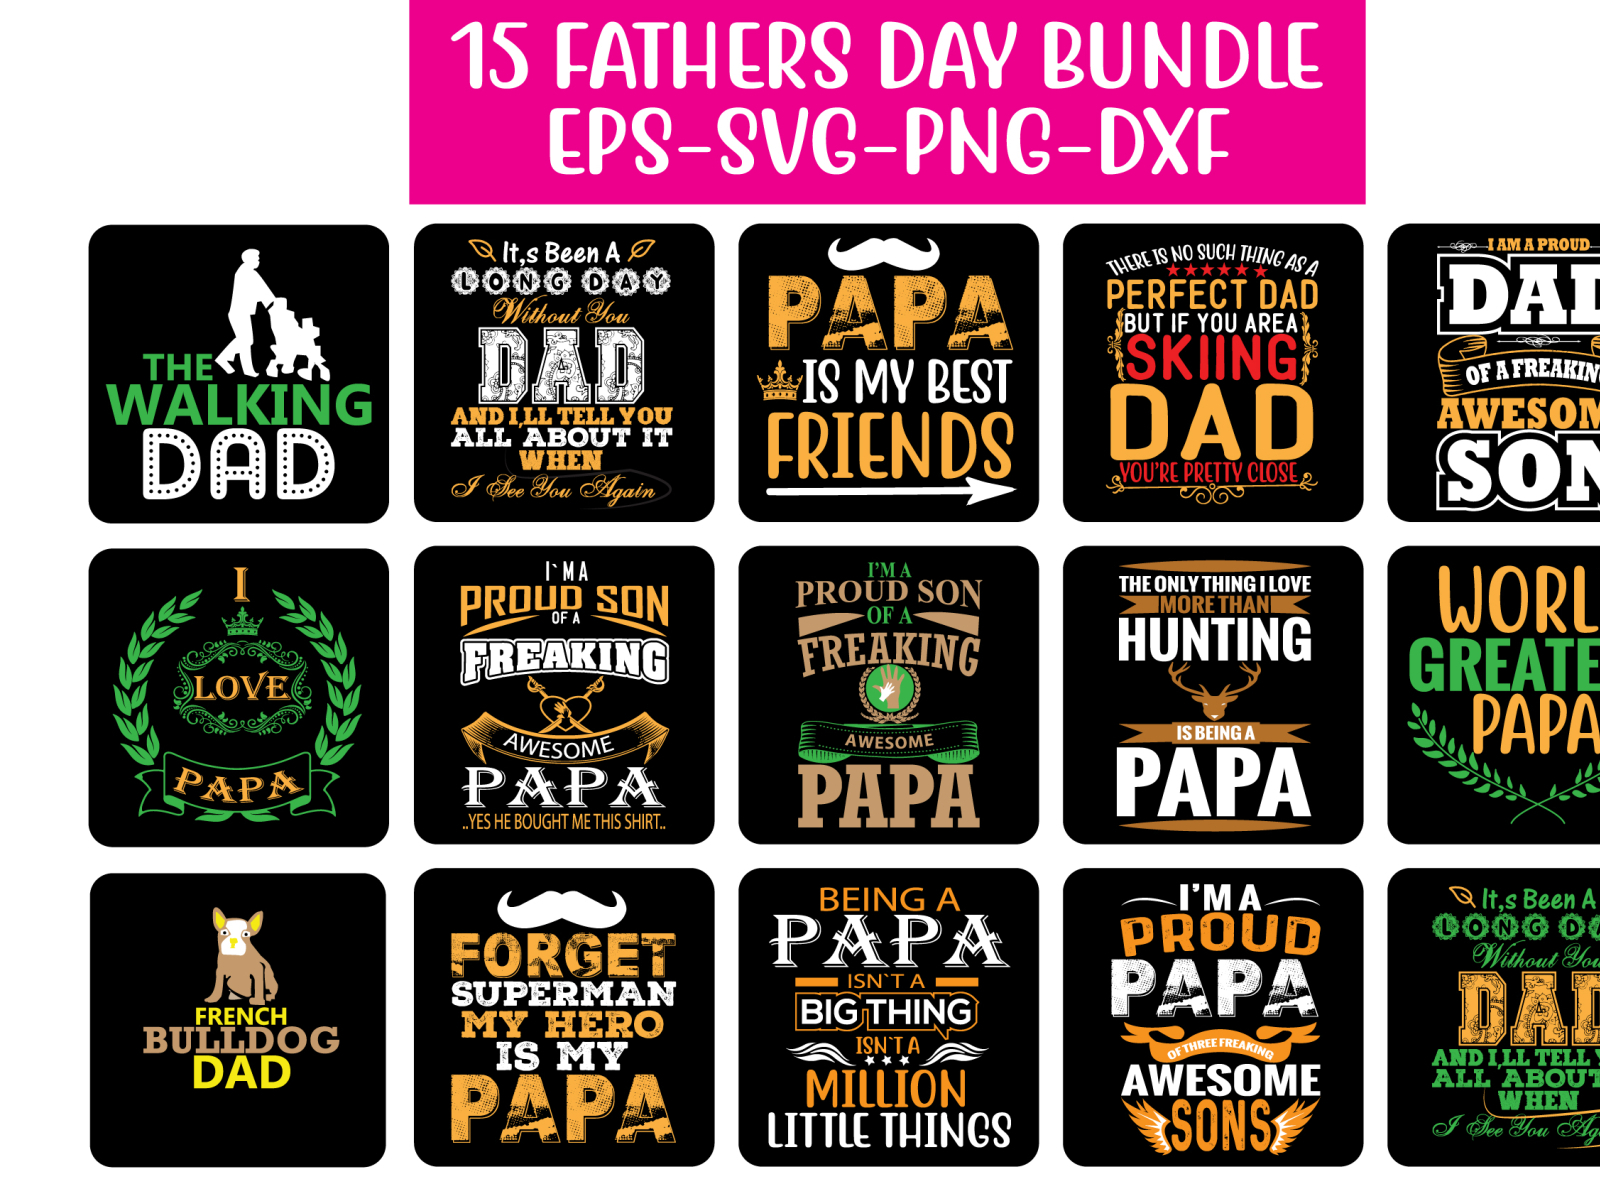 Download Free Fathers Day Bundle By Asia Khatun On Dribbble PSD Mockup Template